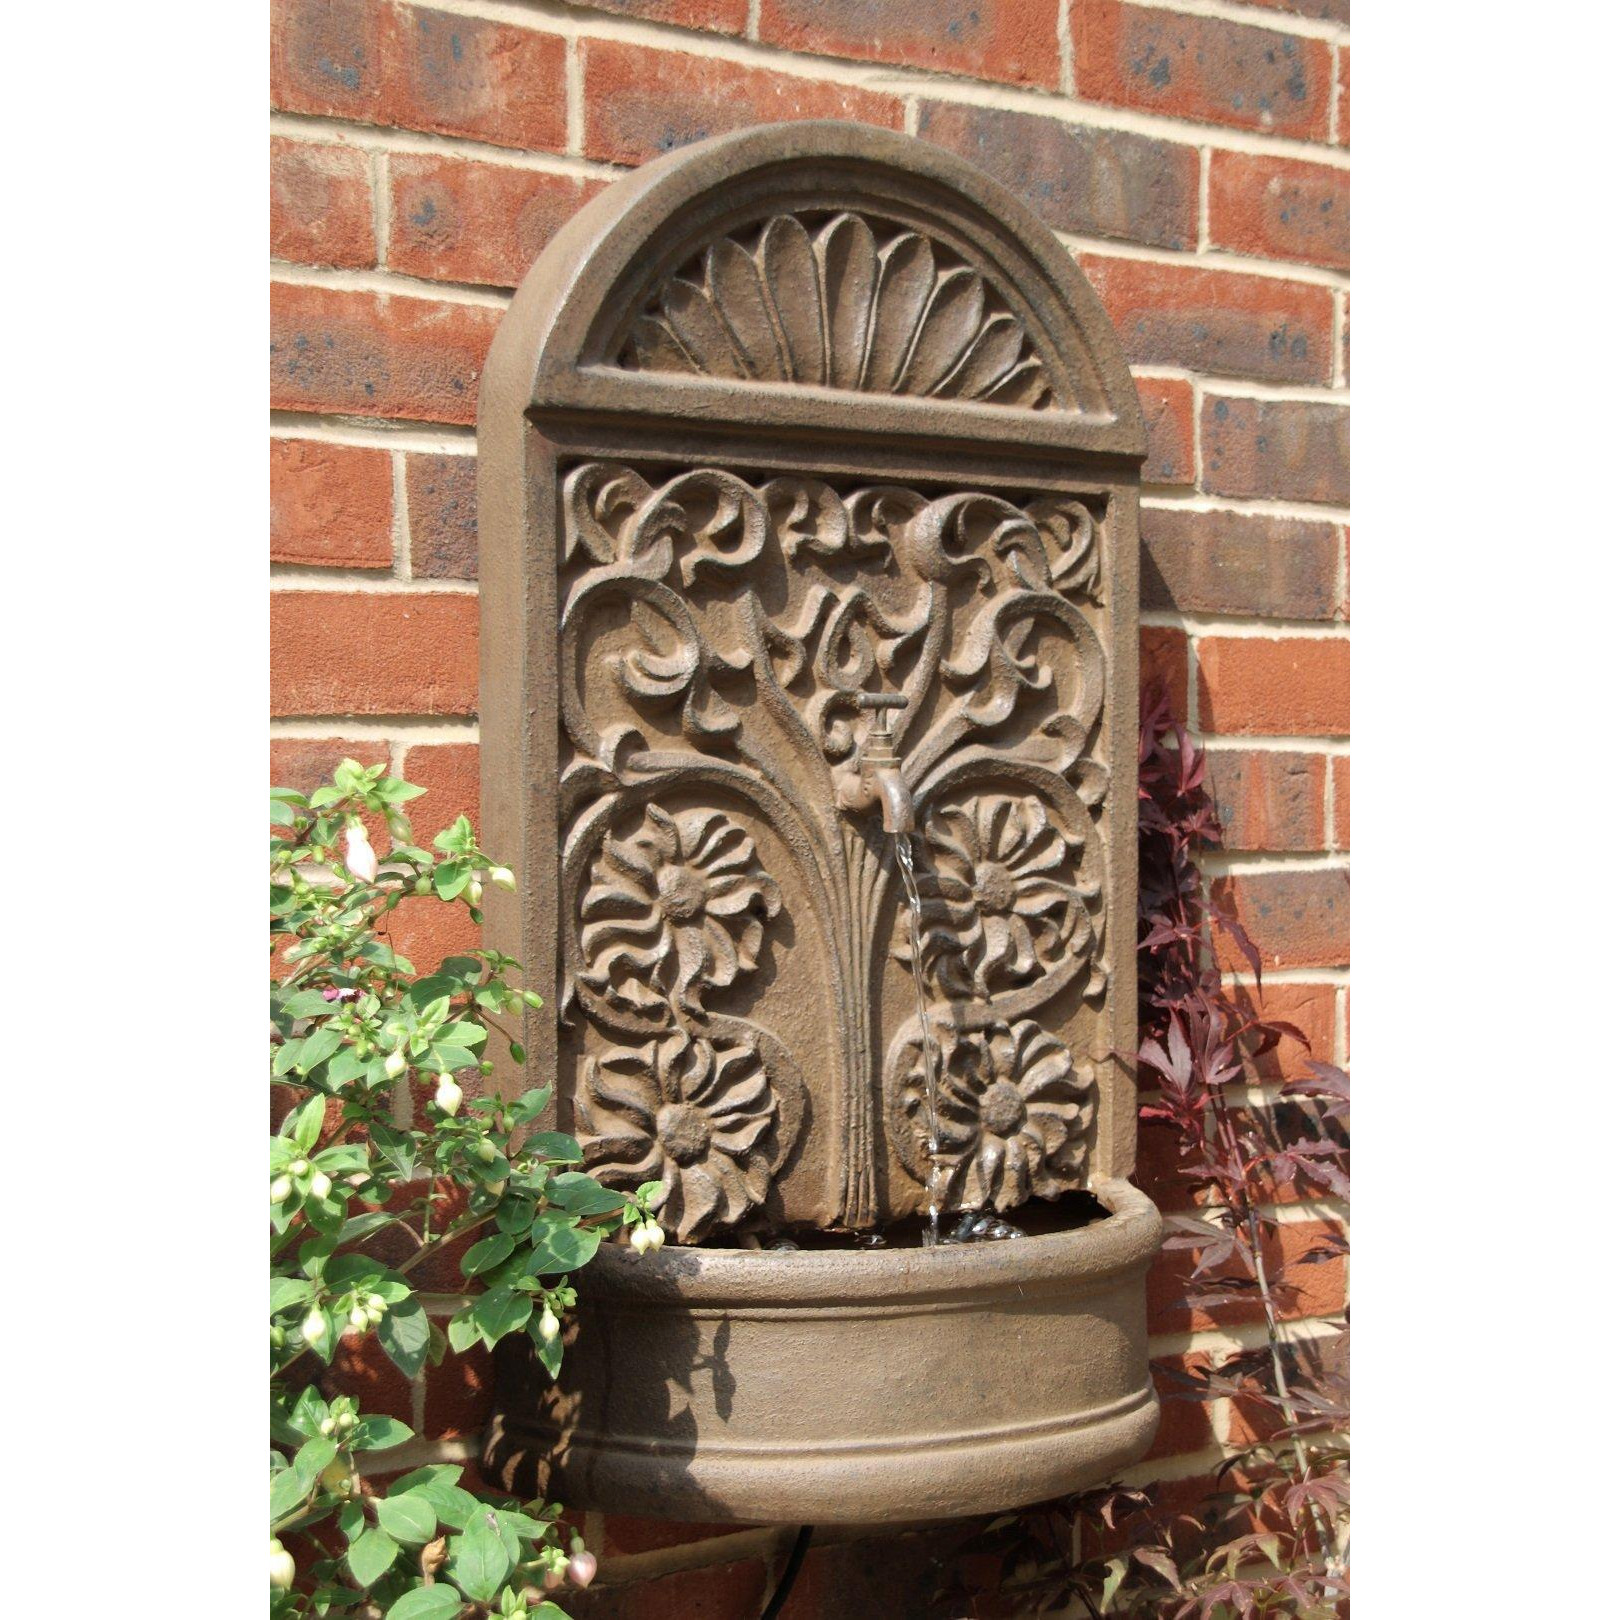 Wall Fountain Water Feature Ornate Design Tap Spout 'Arbury Rust' 72cm - image 1